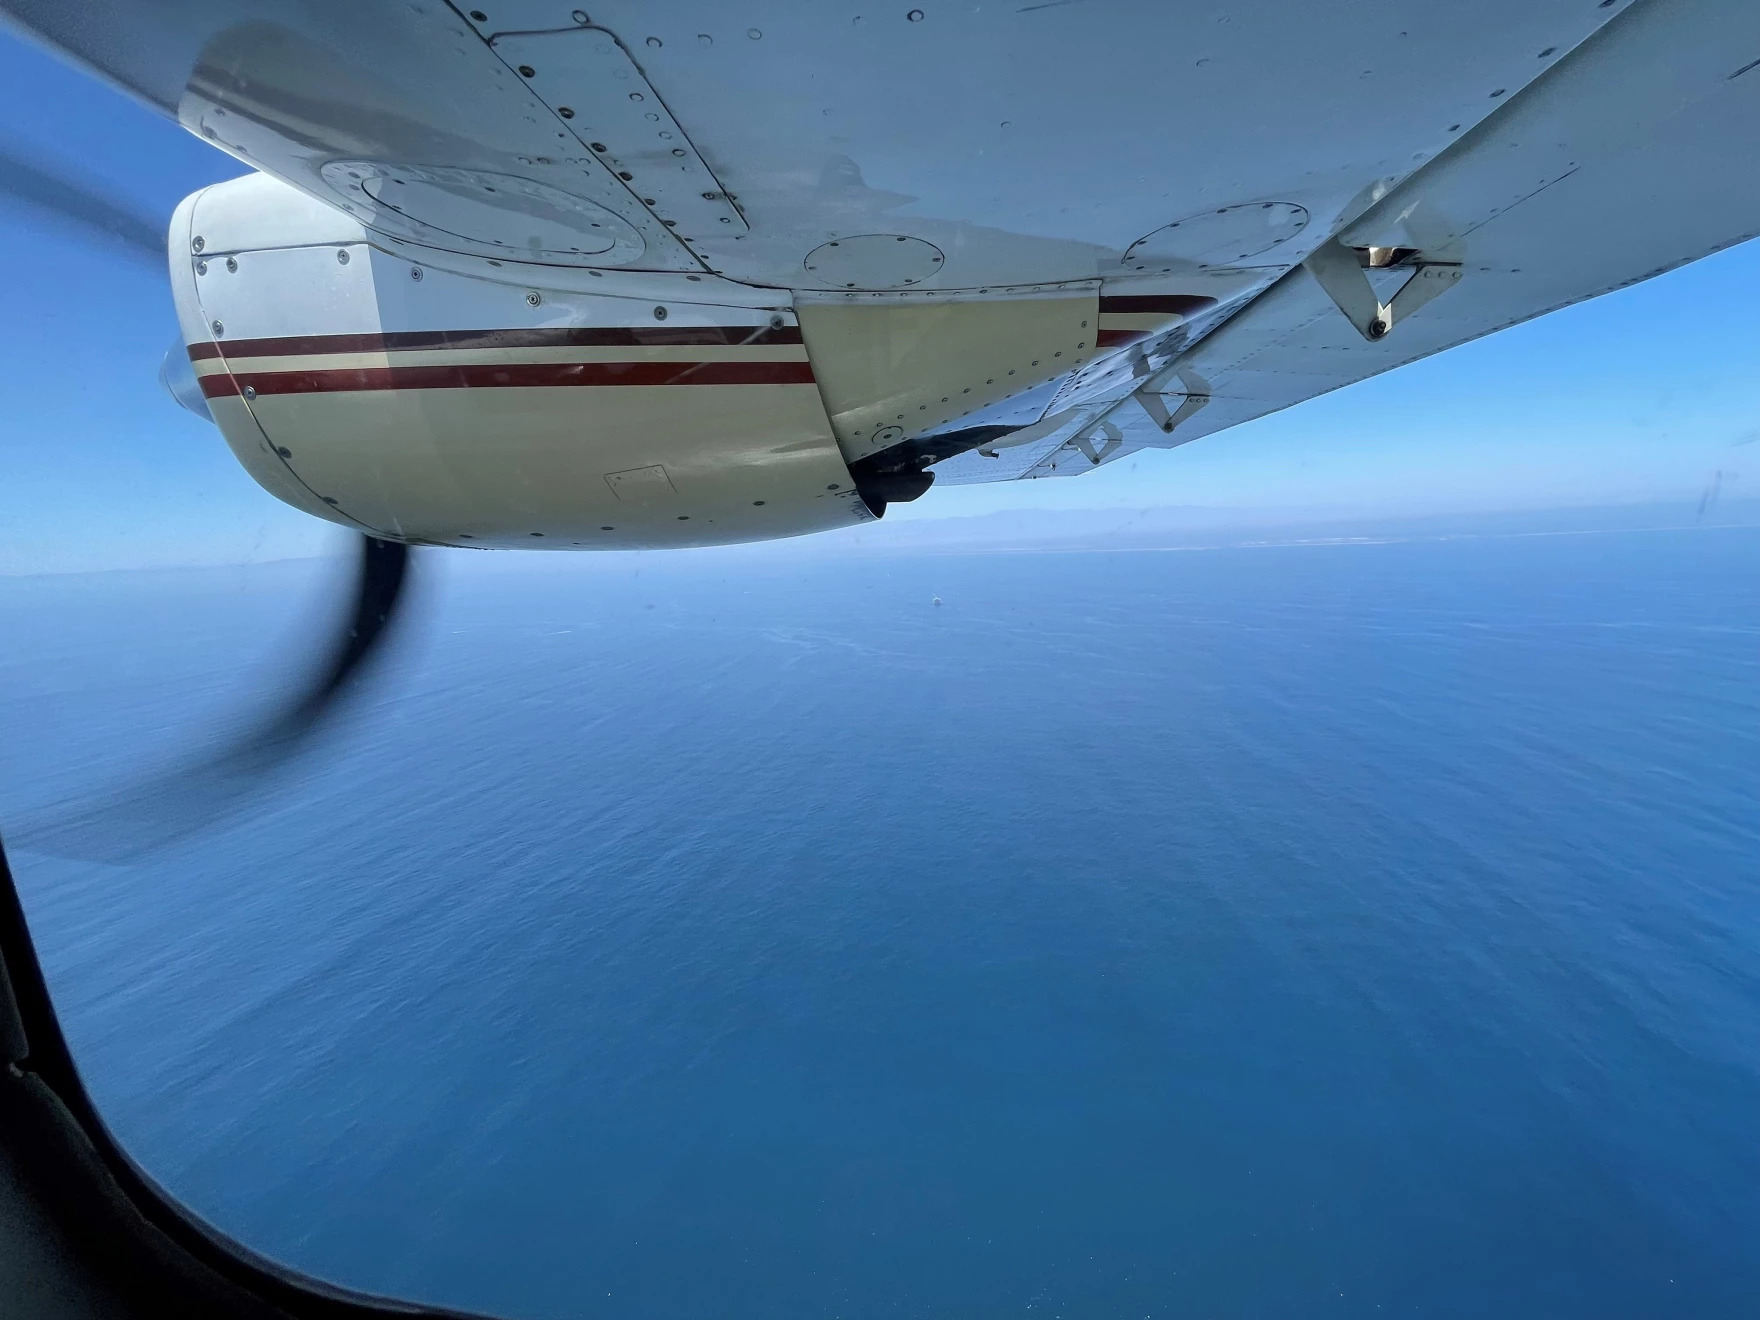 looking out the window of a small propellor plane. the window is directly beneath the wing. the view is just ocean